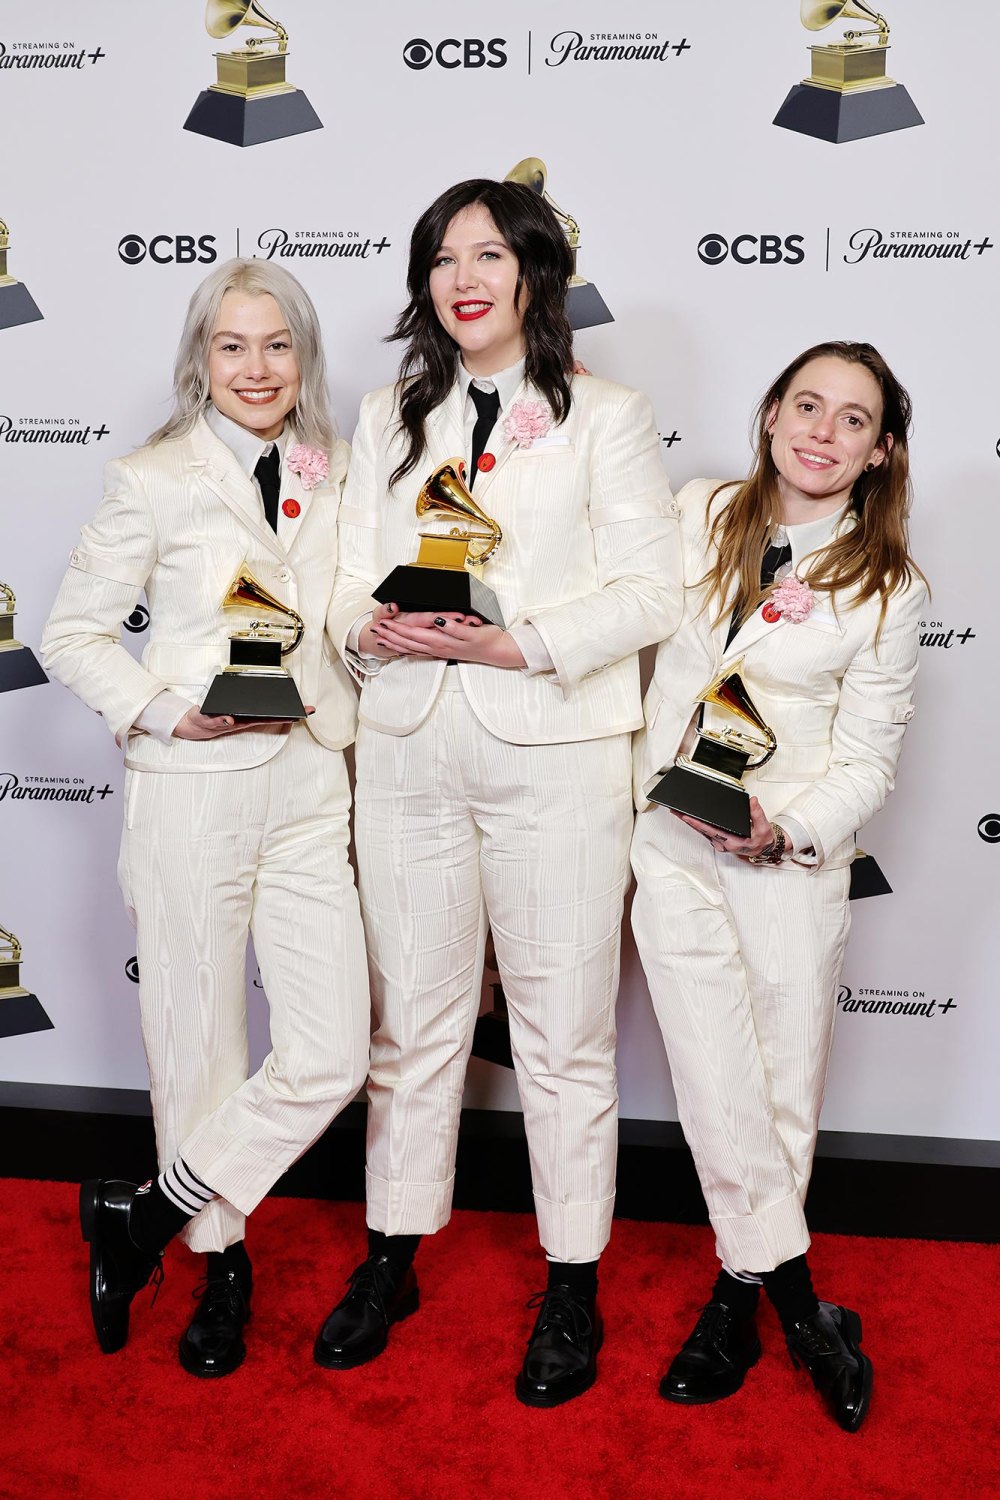 Phoebe Bridgers Tells Former Grammys CEO Neil Portnow to Rot in Piss Lucy Dacus and Julien Baker Boygenius